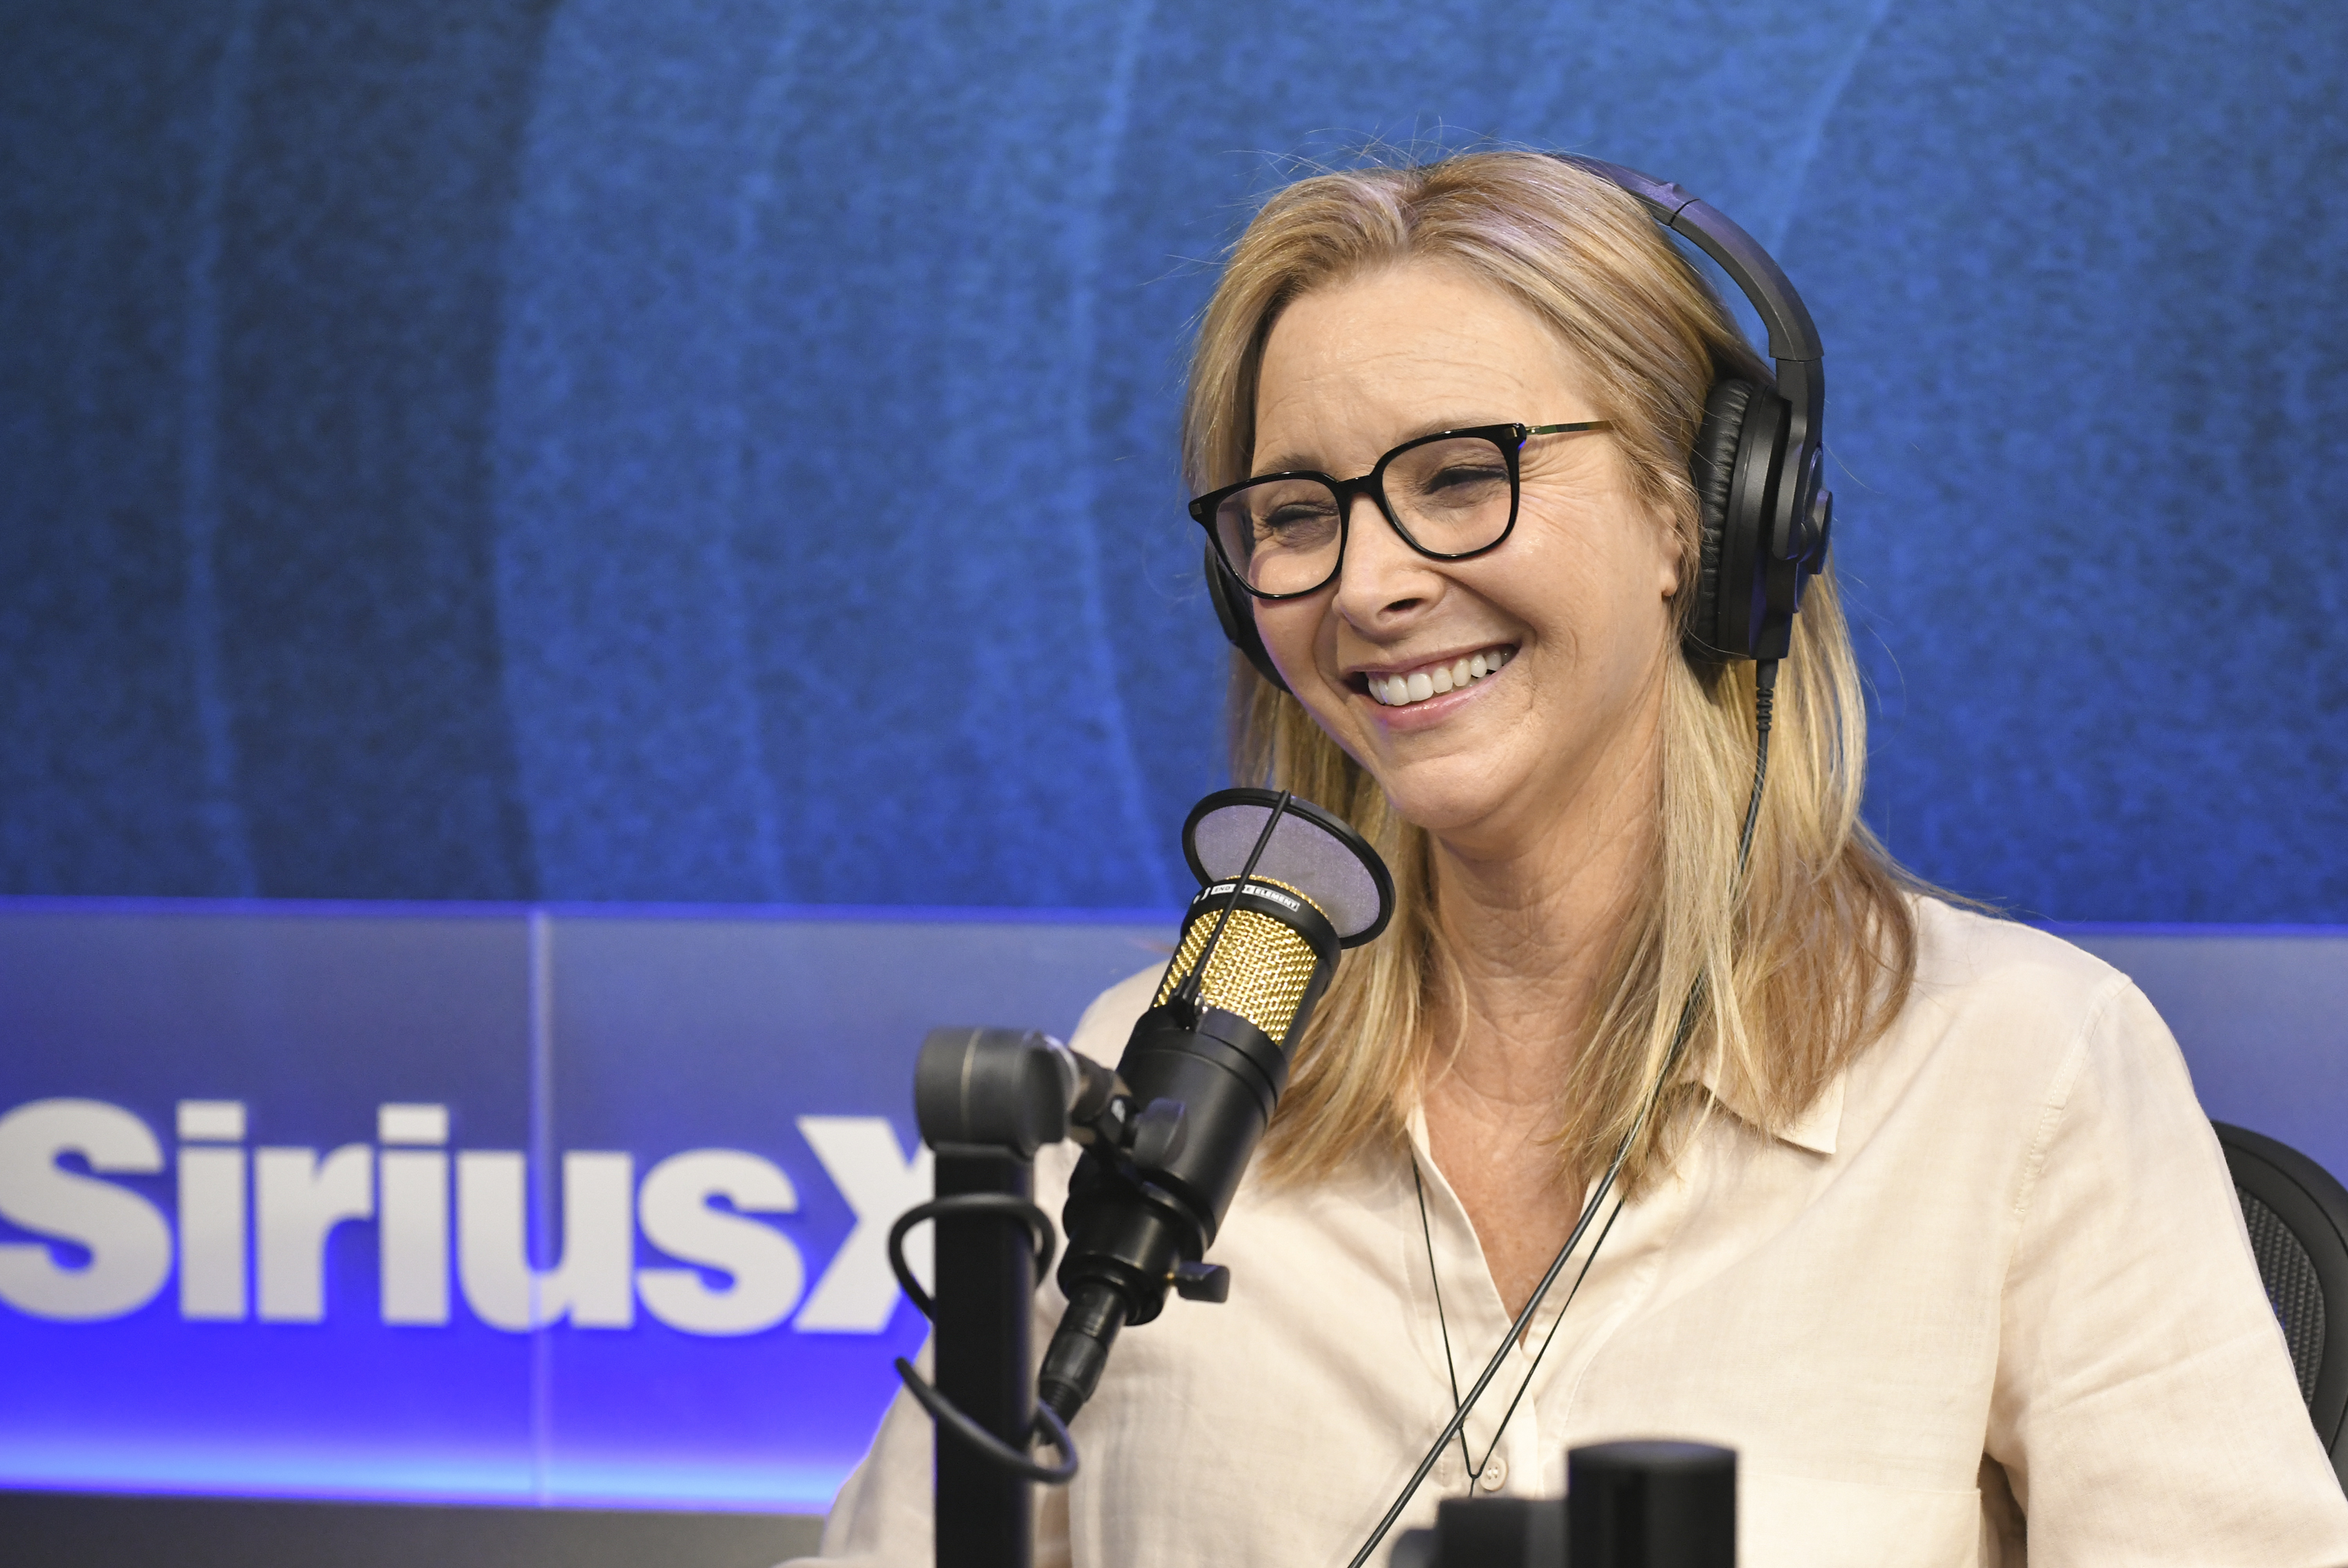 Lisa Kudrow smiling and speaking during a radio interview at SiriusXM studios, wearing a casual blouse, glasses, and headphones